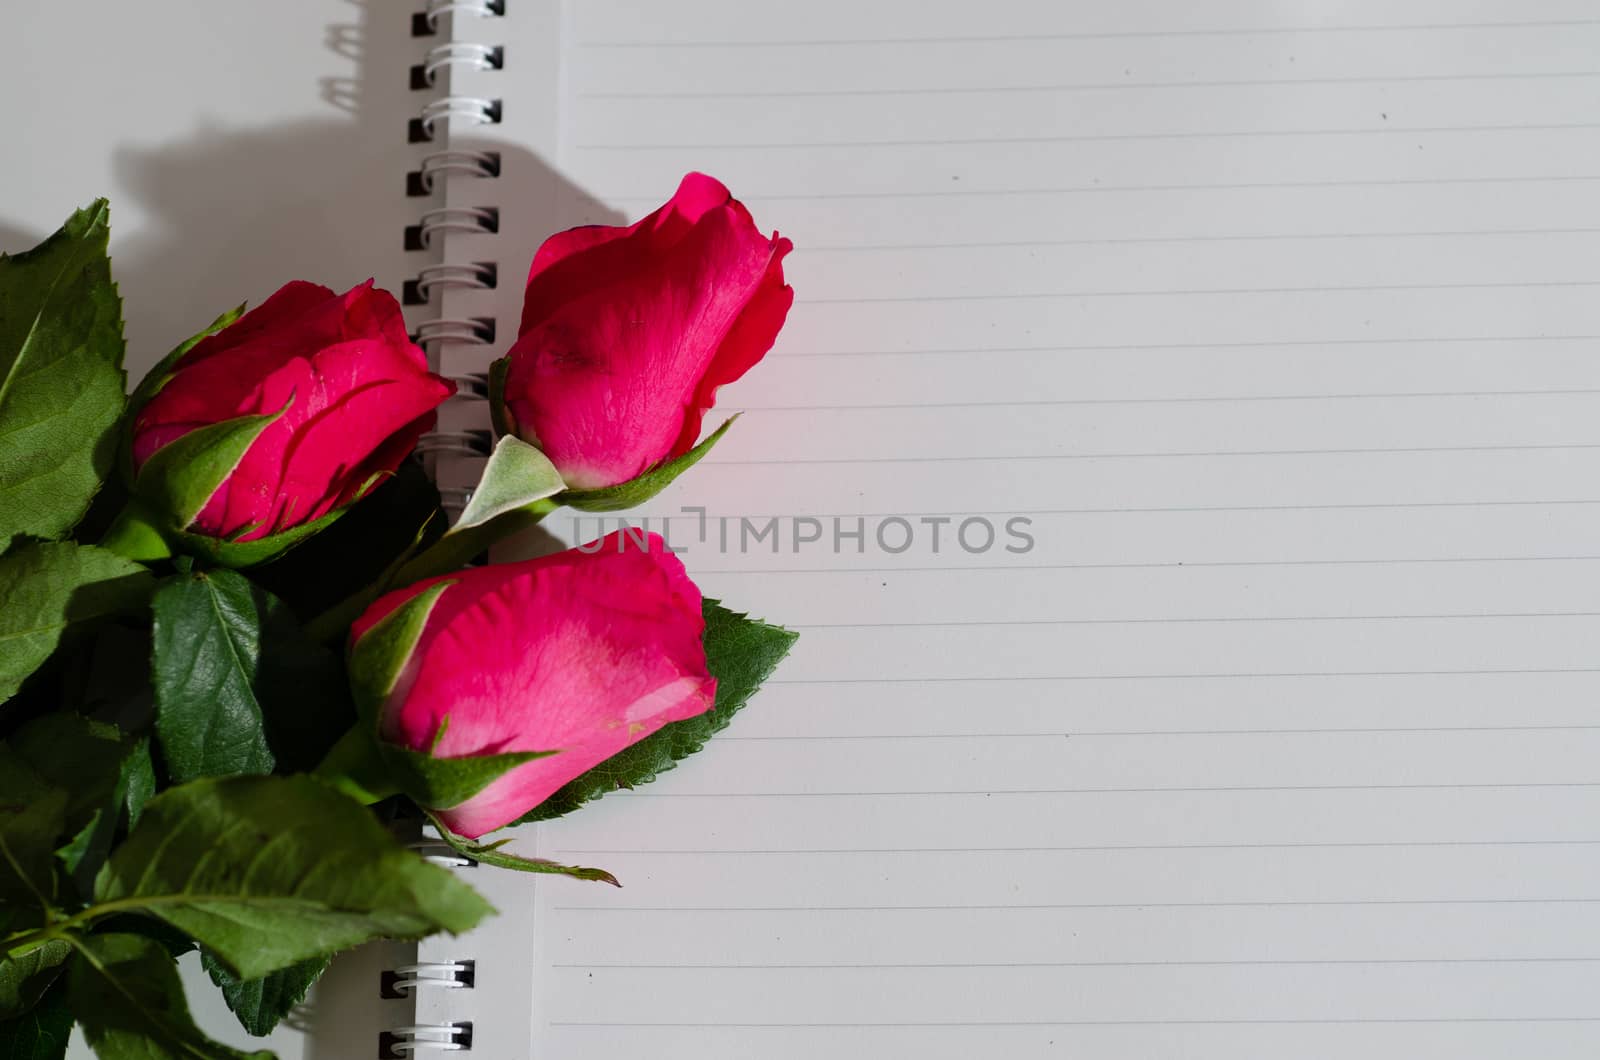 rose in the book  romantic and valentine day